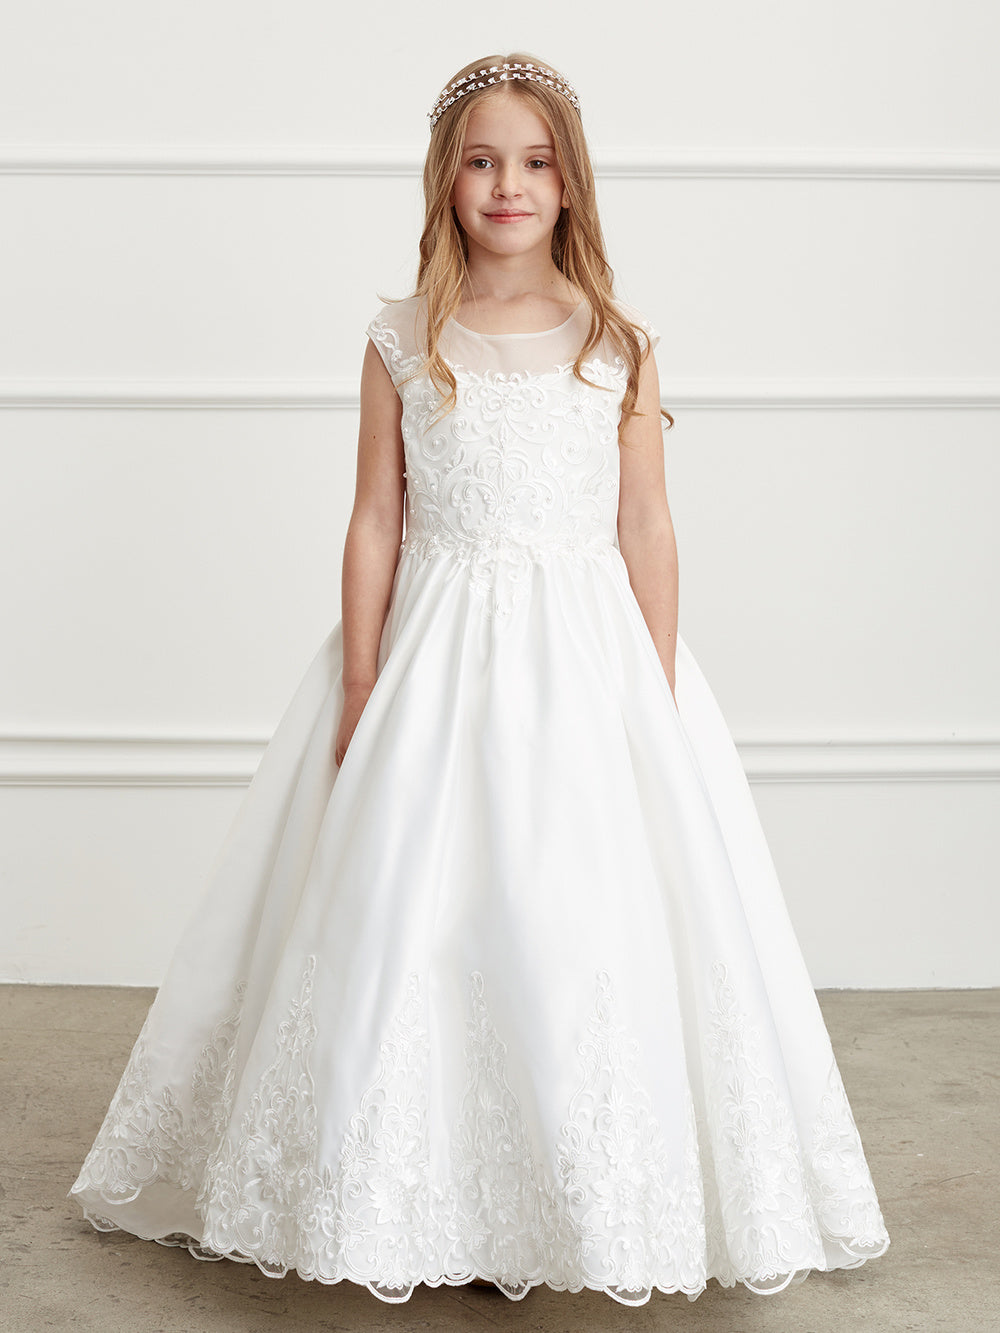 Ivory Girl Dress with Illusion Neckline Lace Bodice Dress - AS5828